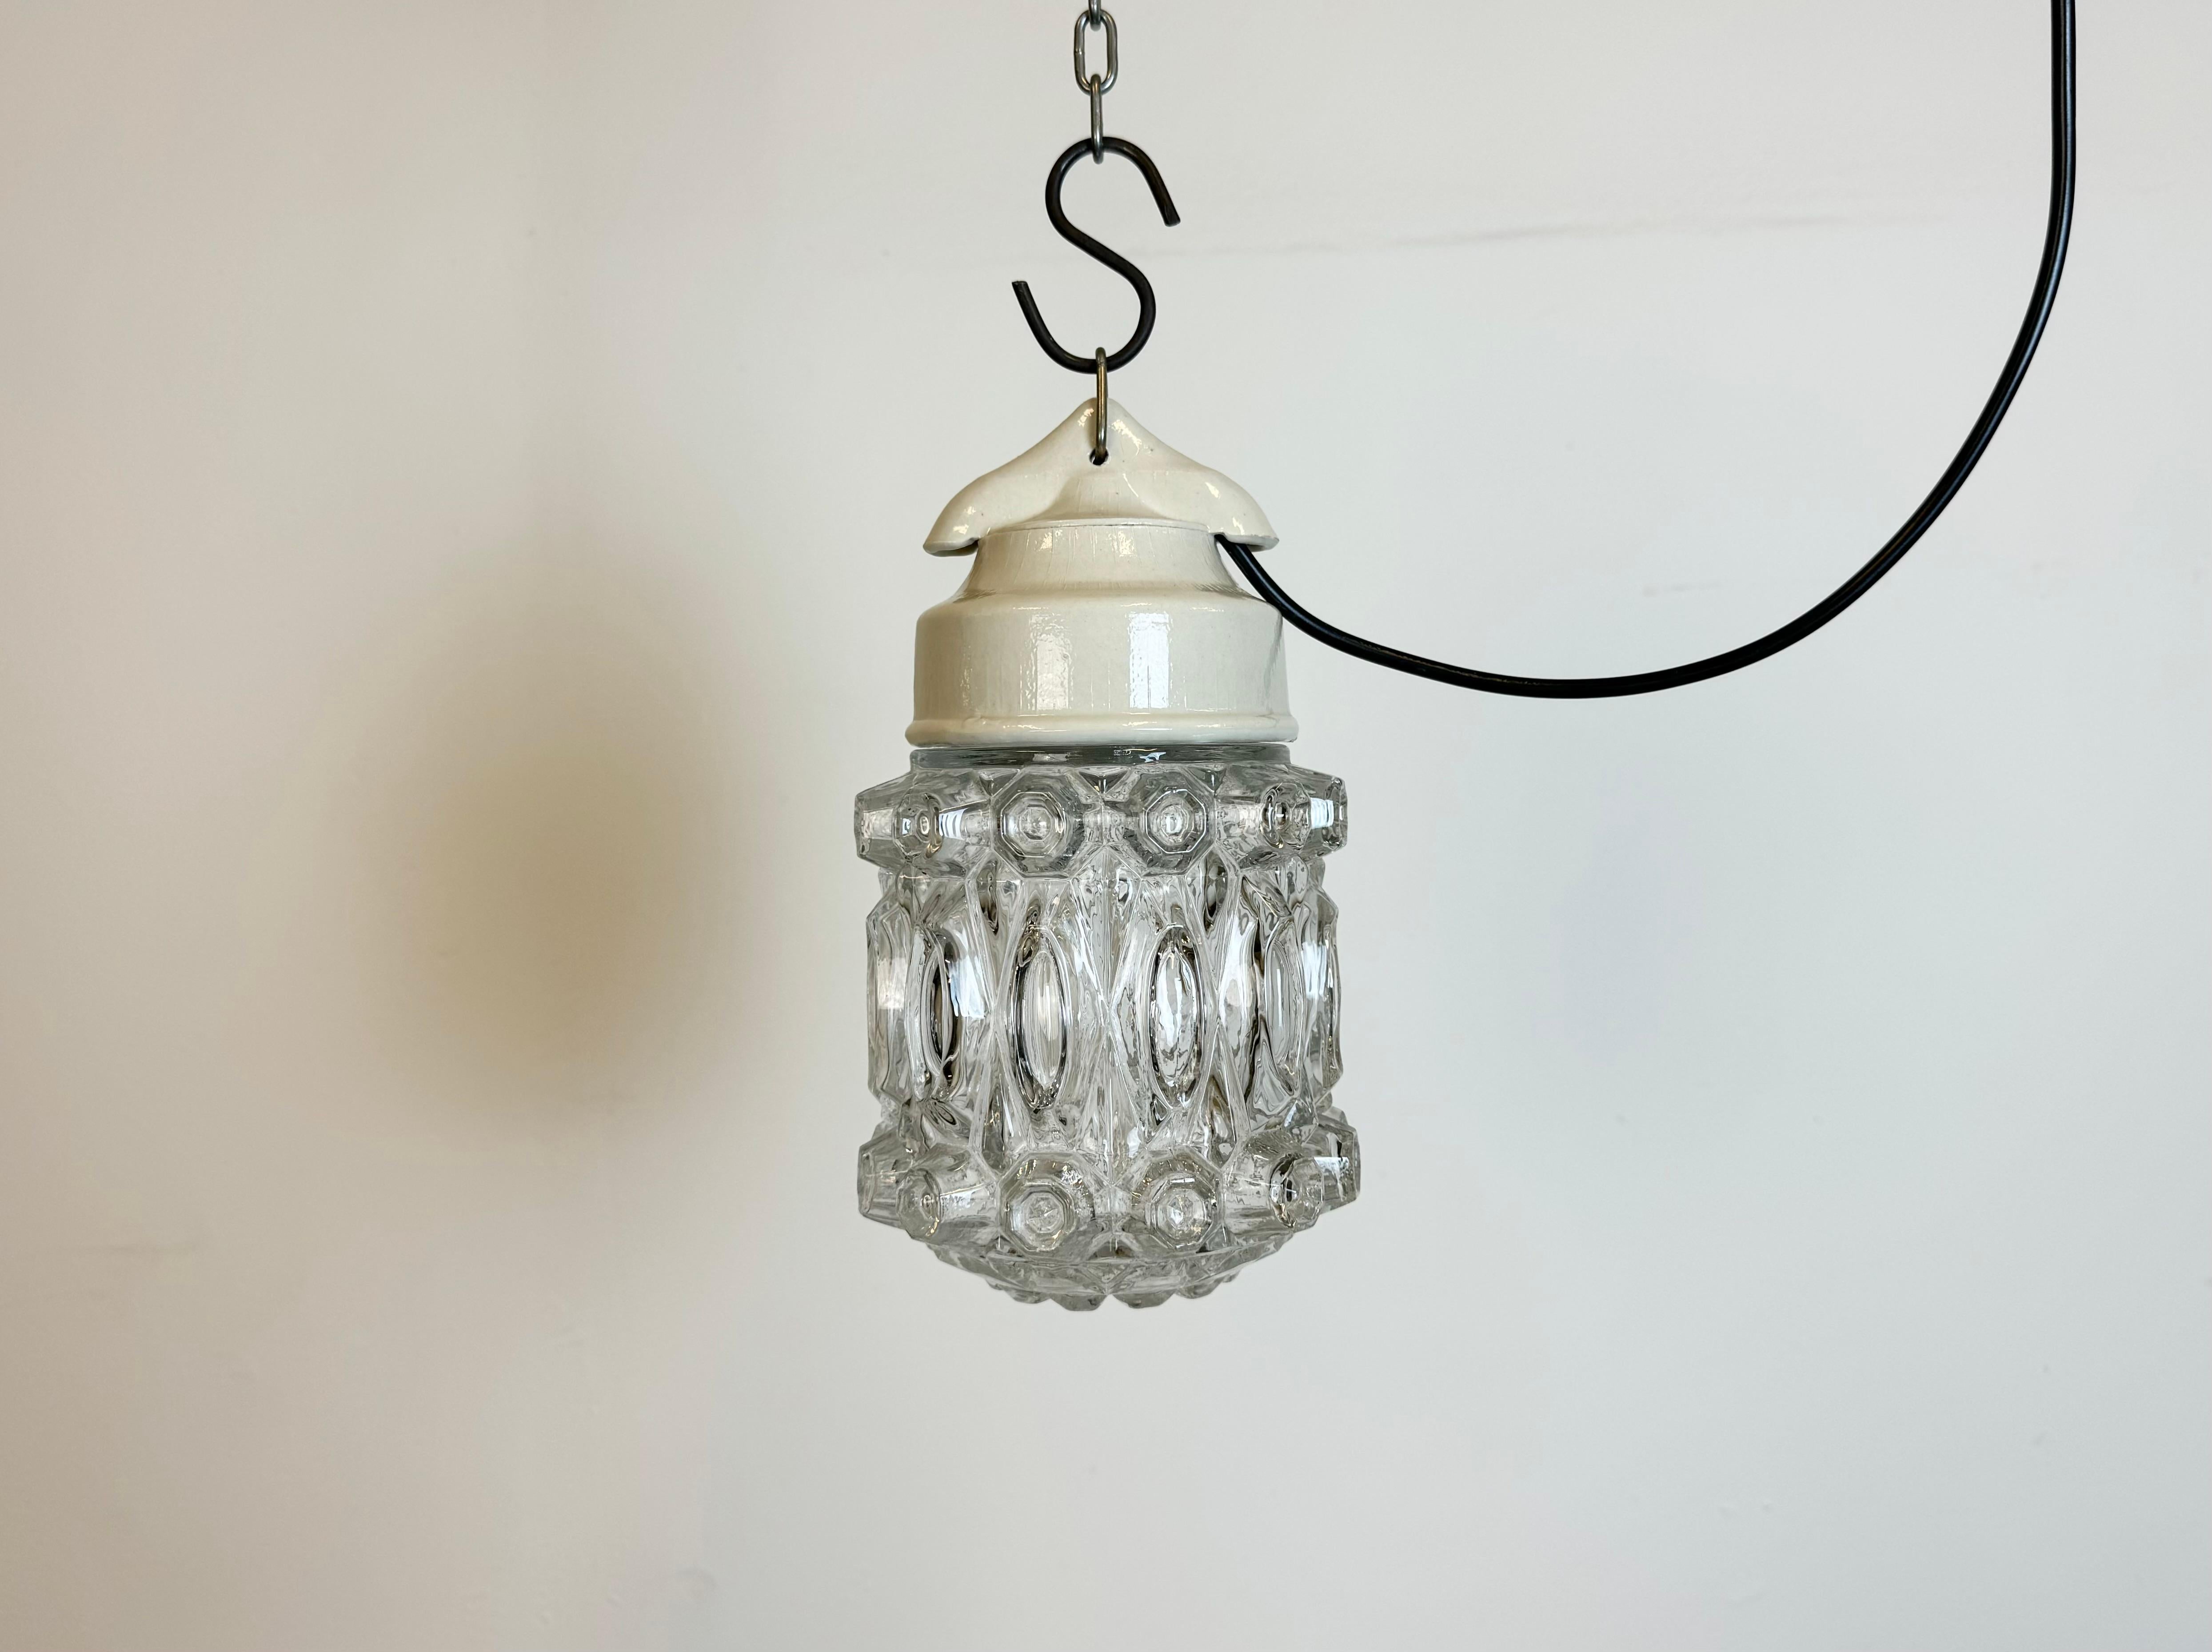 Vintage industrial light made in former Czechoslovakia  during the 1970s. It features a white porcelain top and a glass cover. The socket requires standard E27/ E26 light bulbs. New wire. The weight of the light is 1,4 kg.
Dimensions:
Diameter of